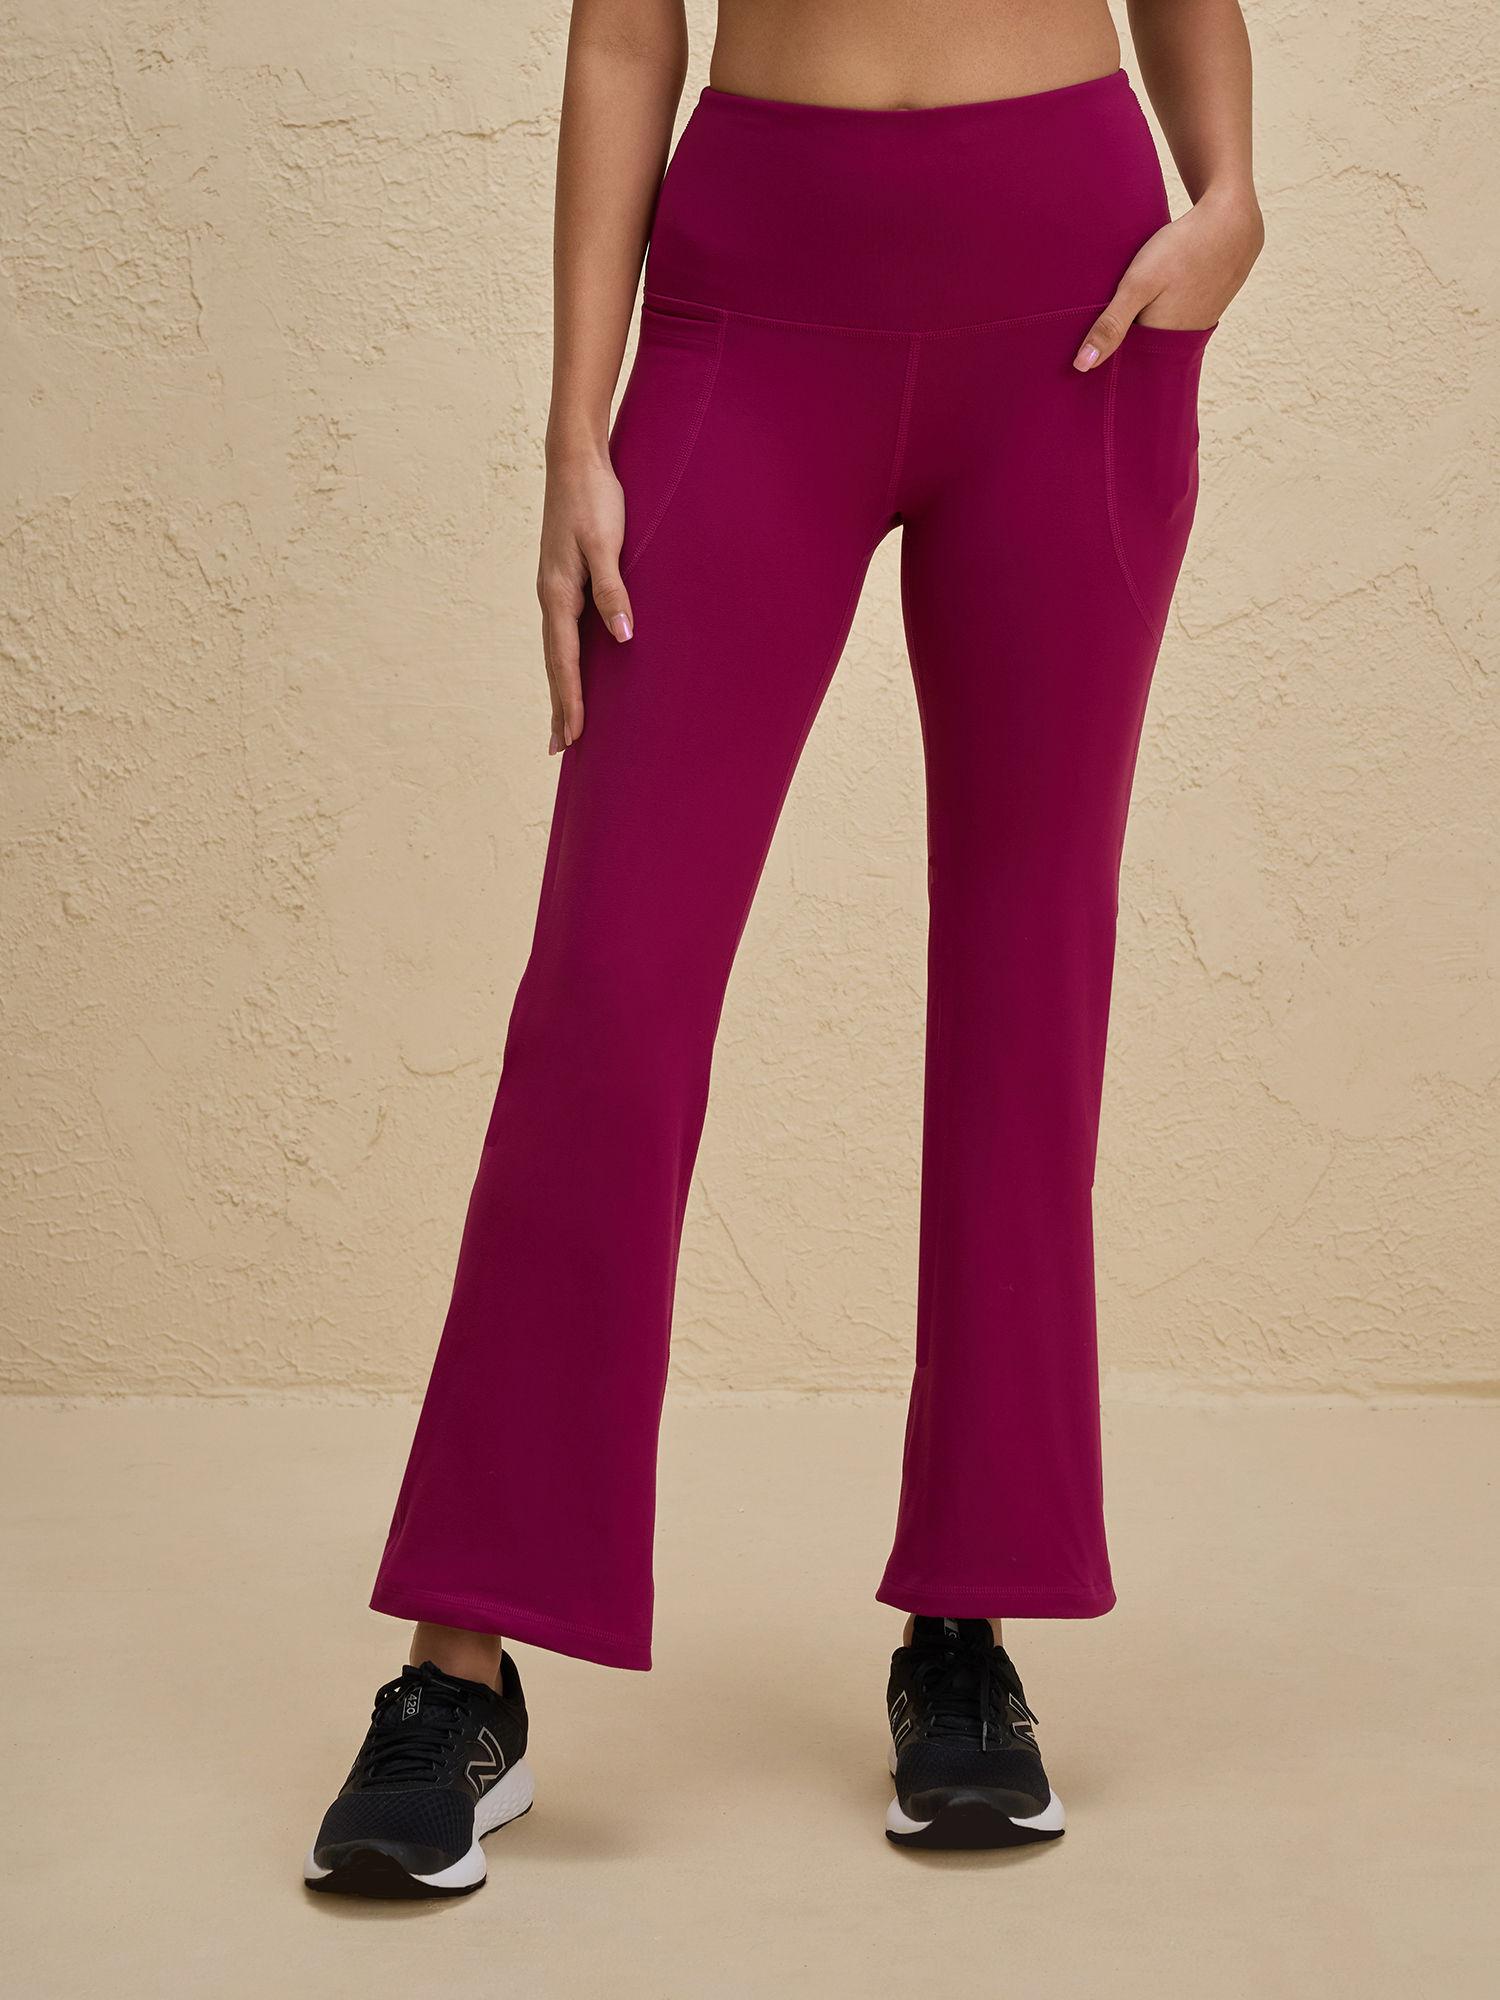 cloud soft super comfy & flattering flare pants with pockets-nyk252-wine